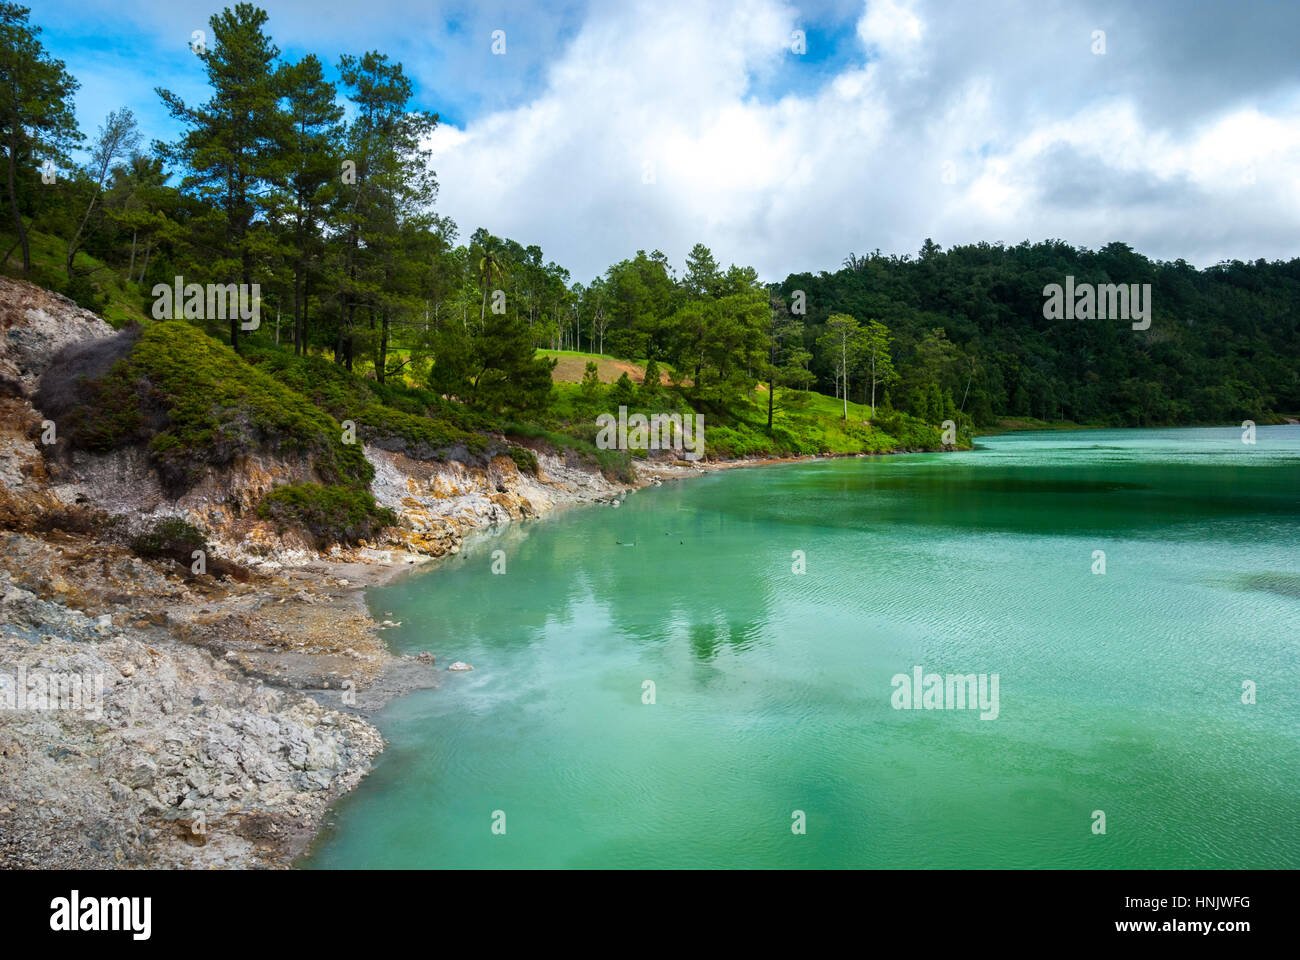 A scenery of Lake Linow, a volcanic lake in Lahendong, South Tomohon, Tomohon, North Sulawesi, Indonesia. Stock Photo